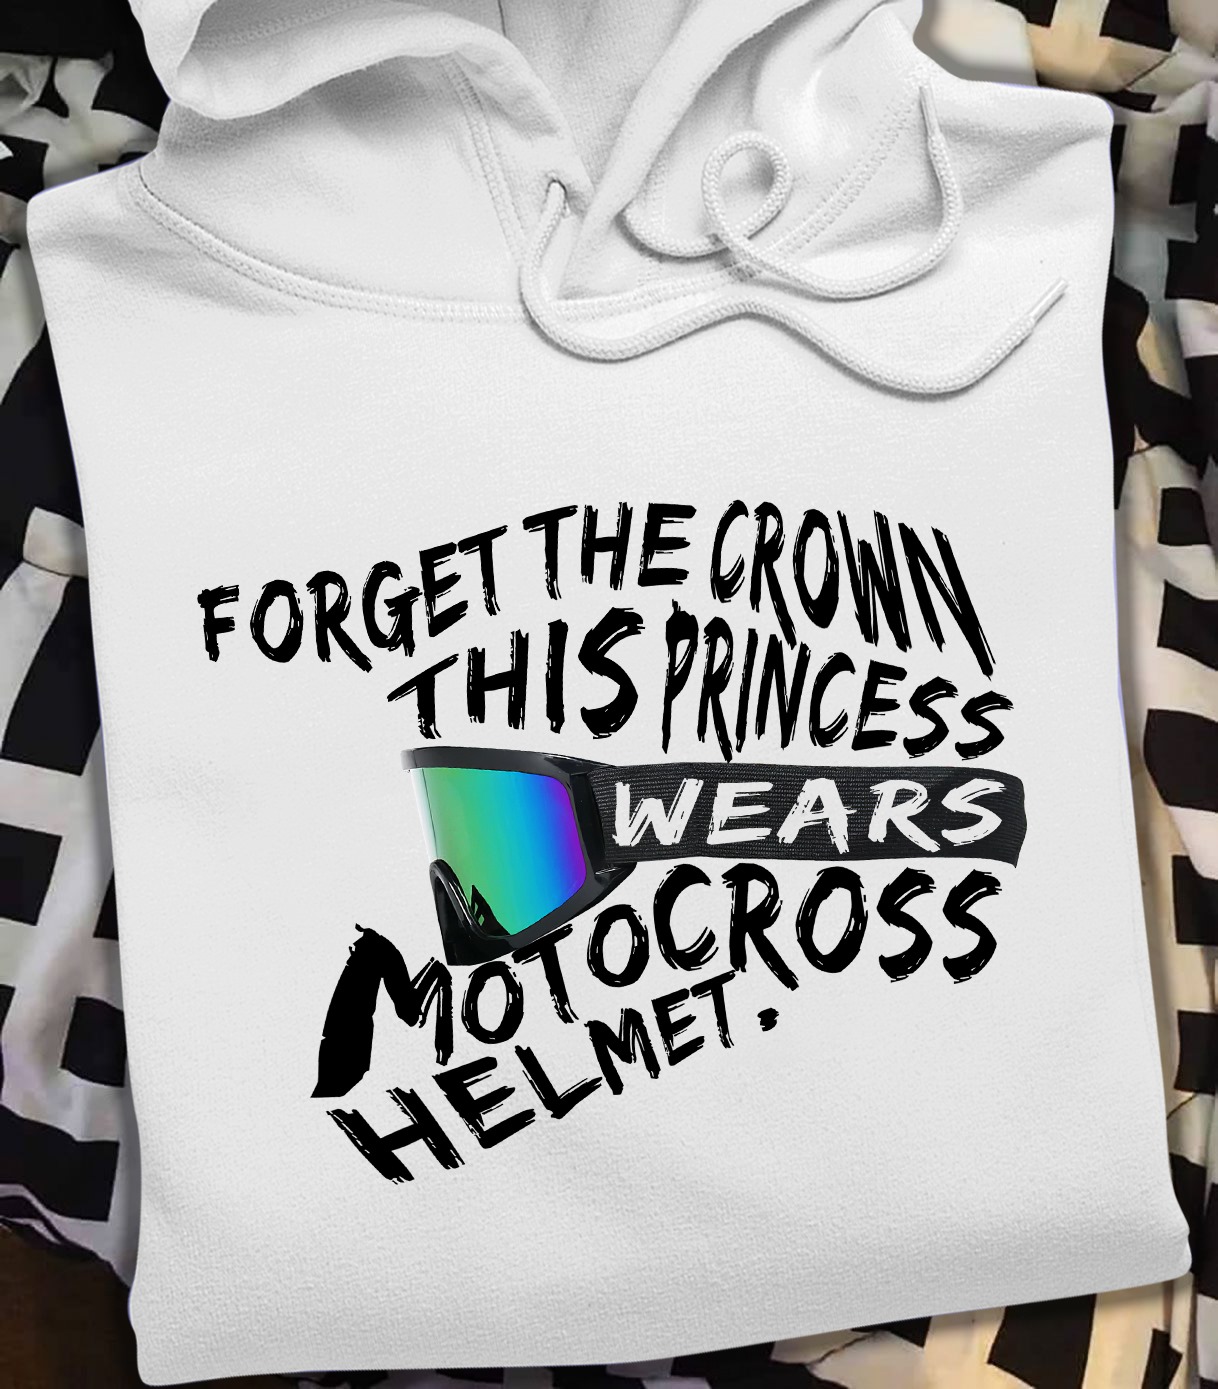 Forget the crown this pricess wear motocross helmet